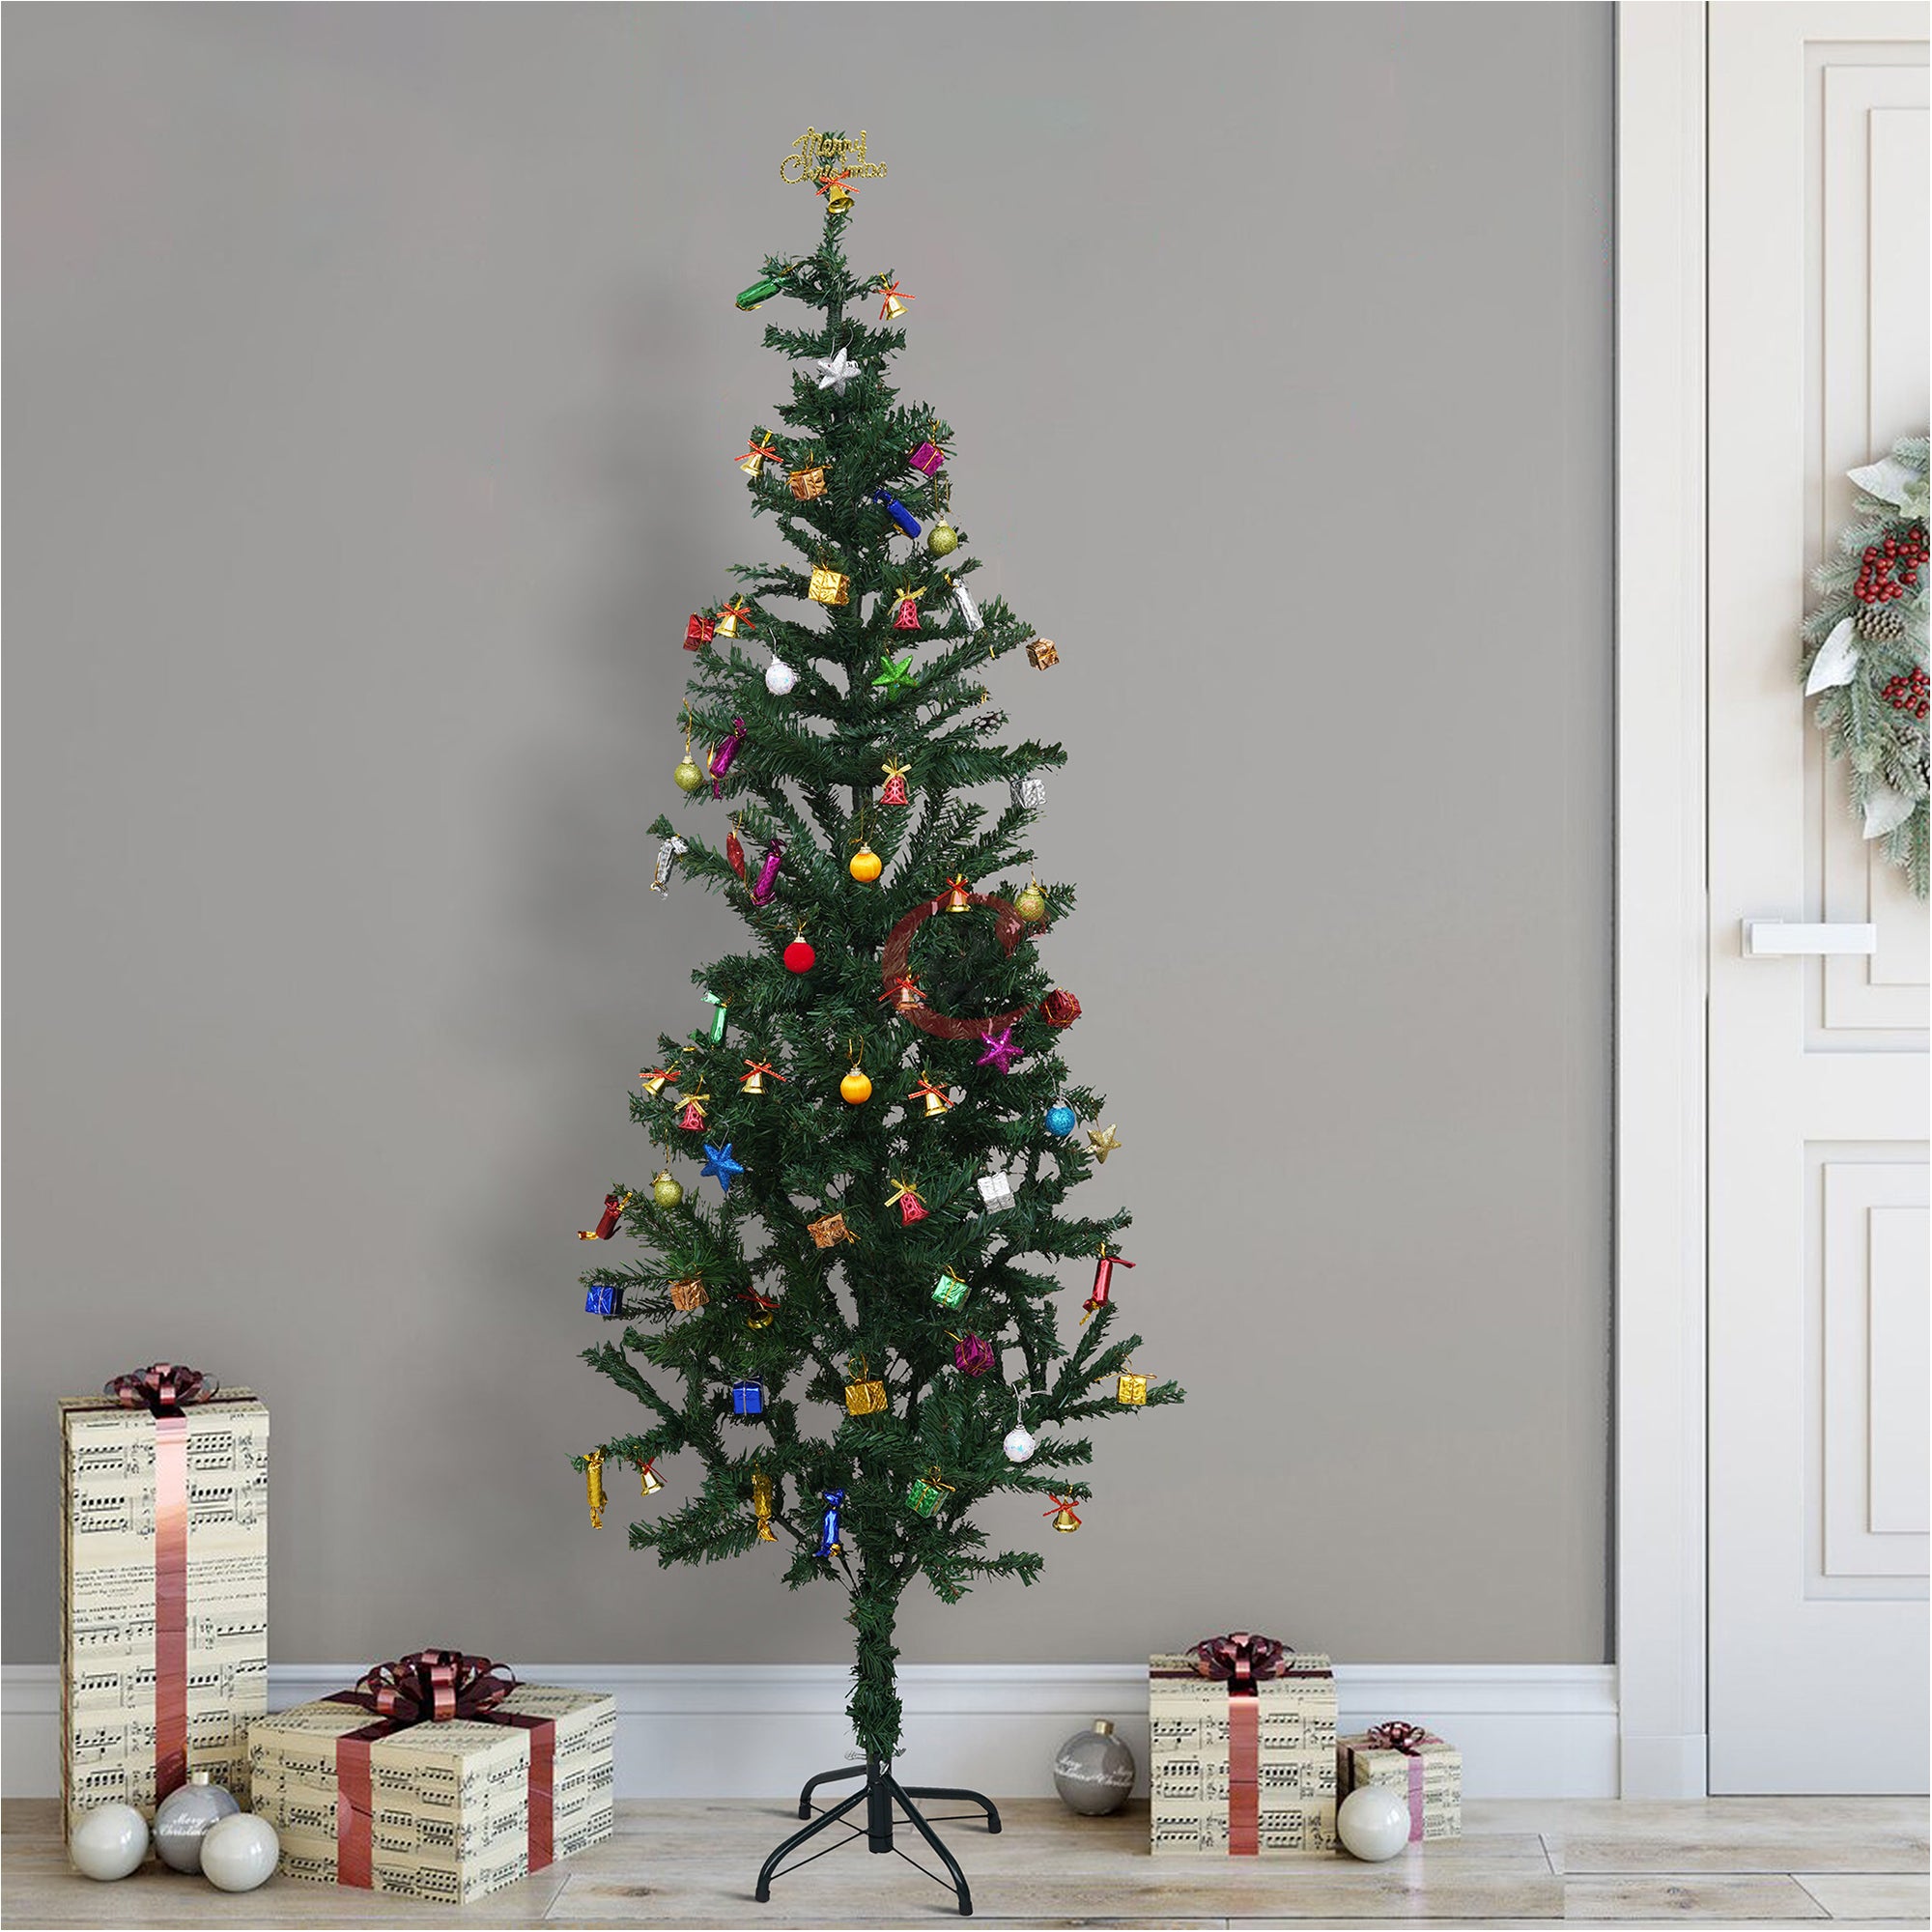 eCraftIndia 5 Feet Green Artificial Christmas Tree Xmas Pine Tree with Stand and 100 Christmas Decoration Ornaments Props - Merry Christmas Decoration Item for Home, Office, and Church 1